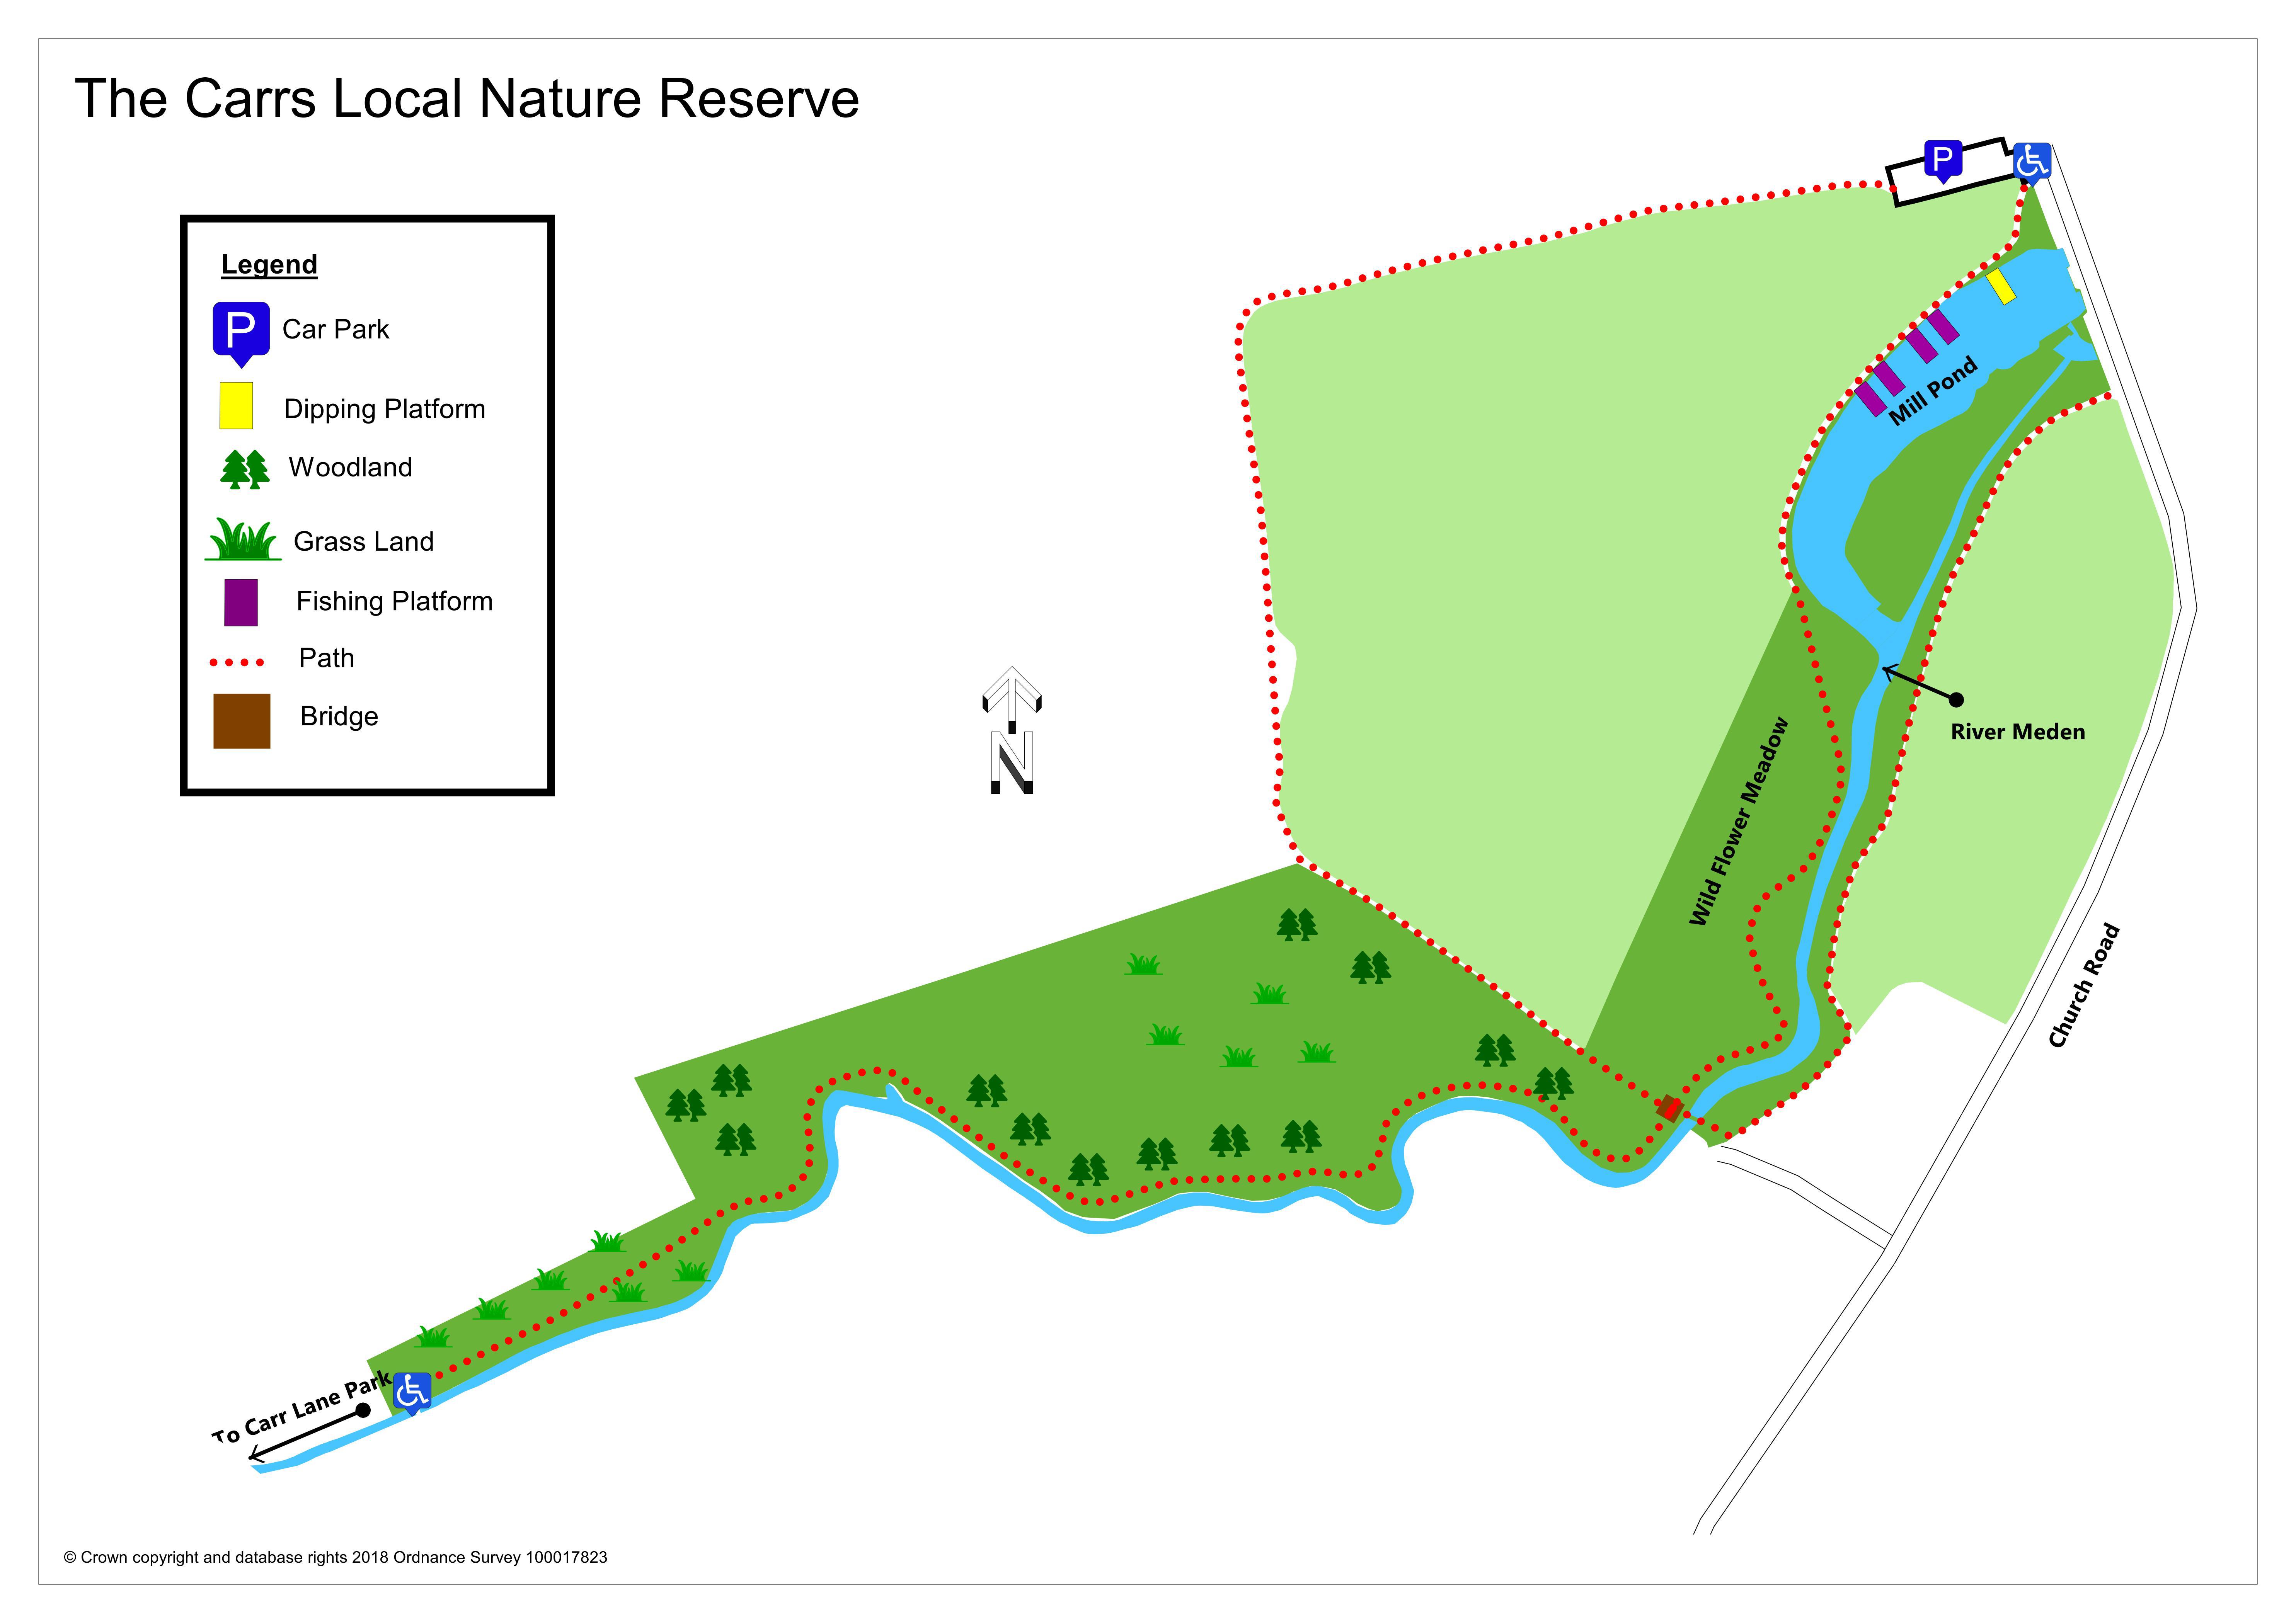 The Carrs Local Nature Reserve map